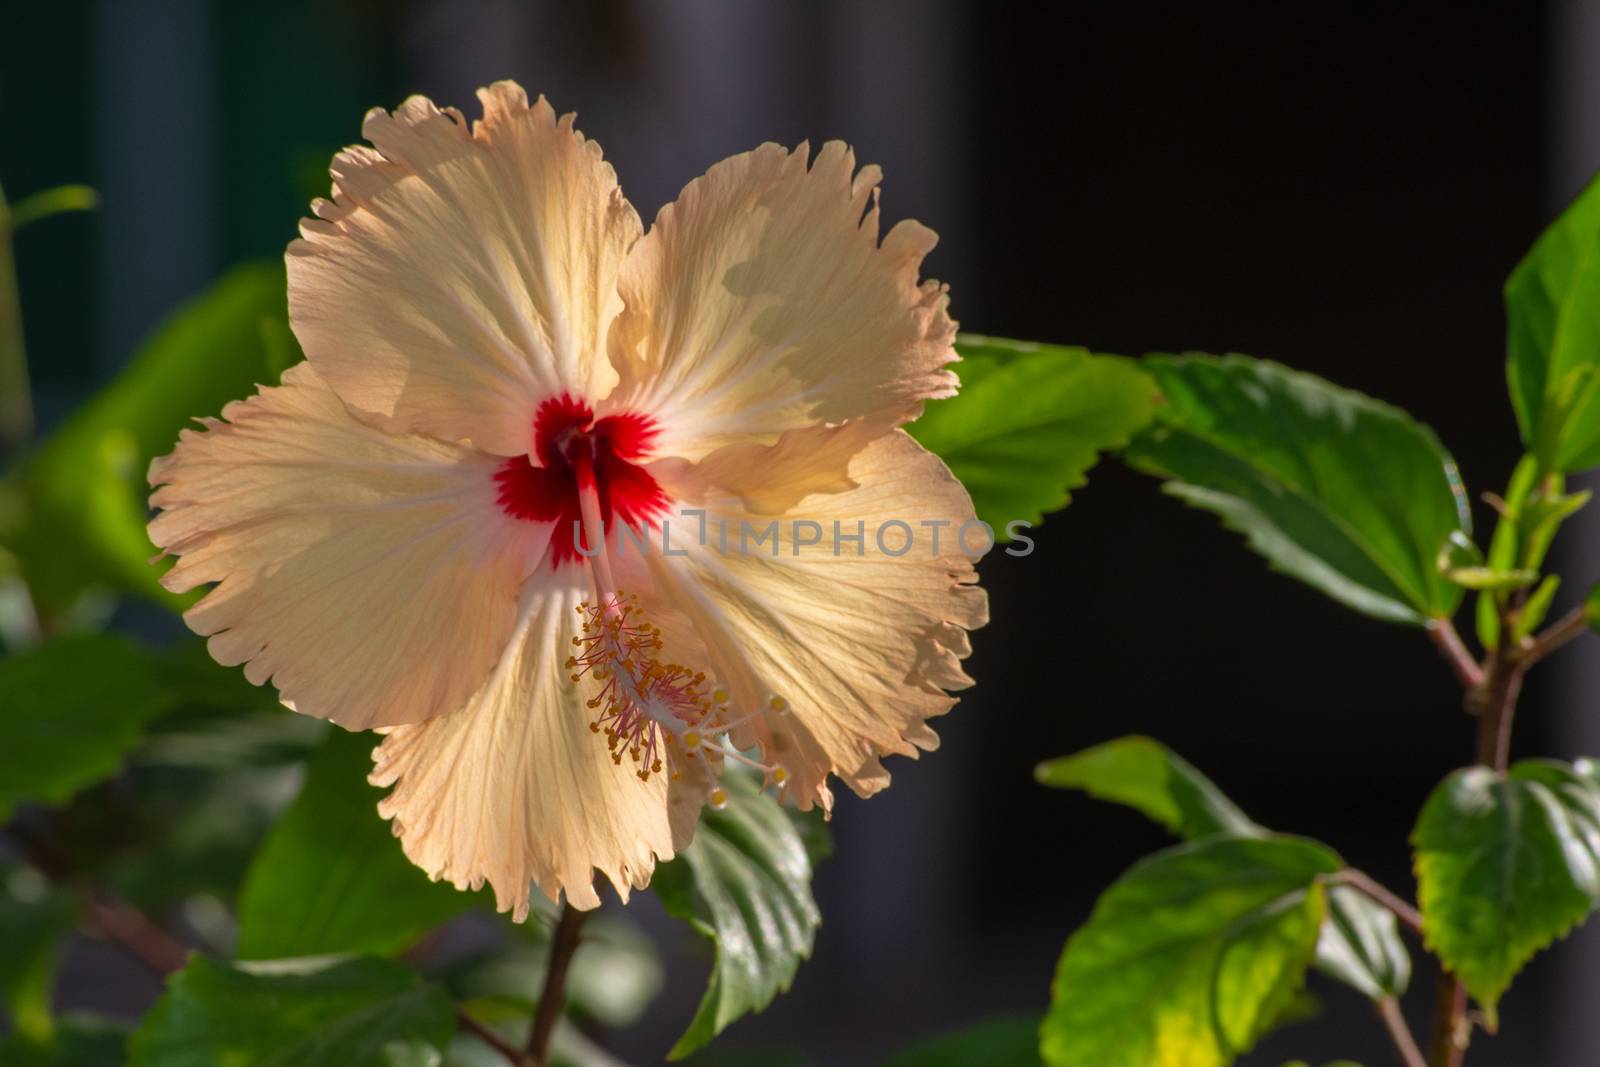 The beautiful yellow Chinese hibiscus also known as the China rose, Hawaiian hibiscus,, rose mallow and shoeblackplant in a garden in the UAE.